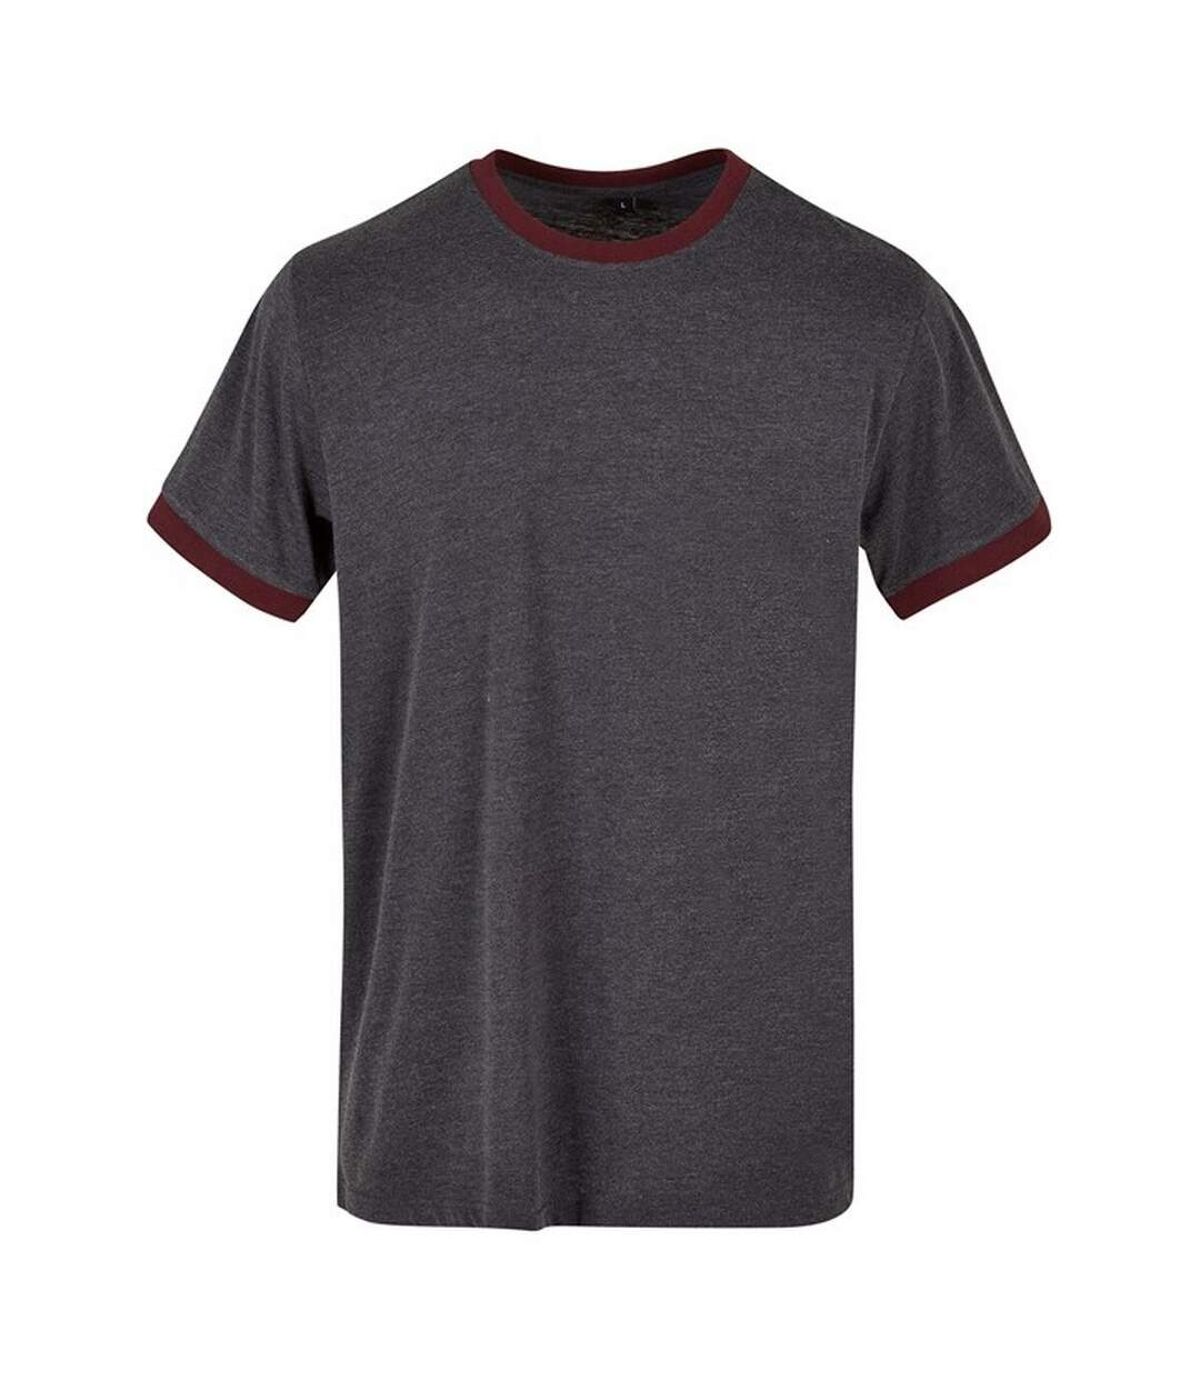 Build Your Brand Mens T-Shirt (Charcoal/Cherry)